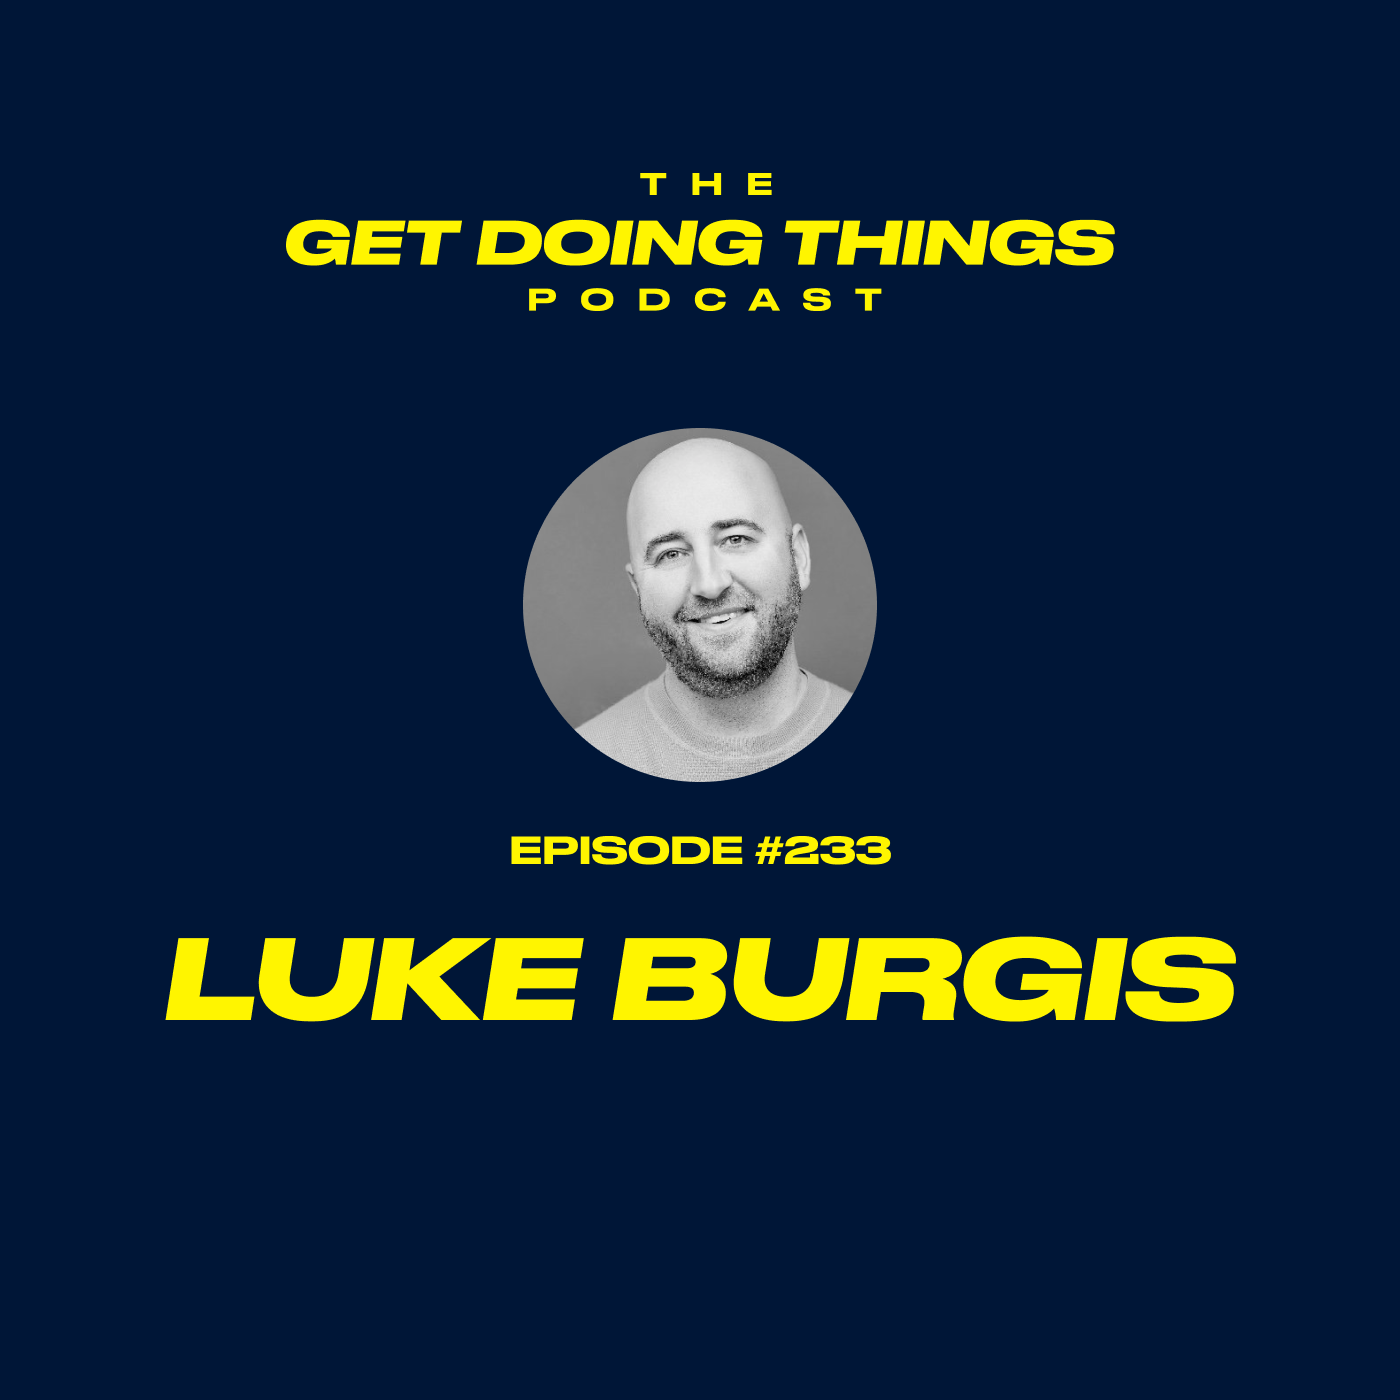 Luke Burgis - The cult of experts